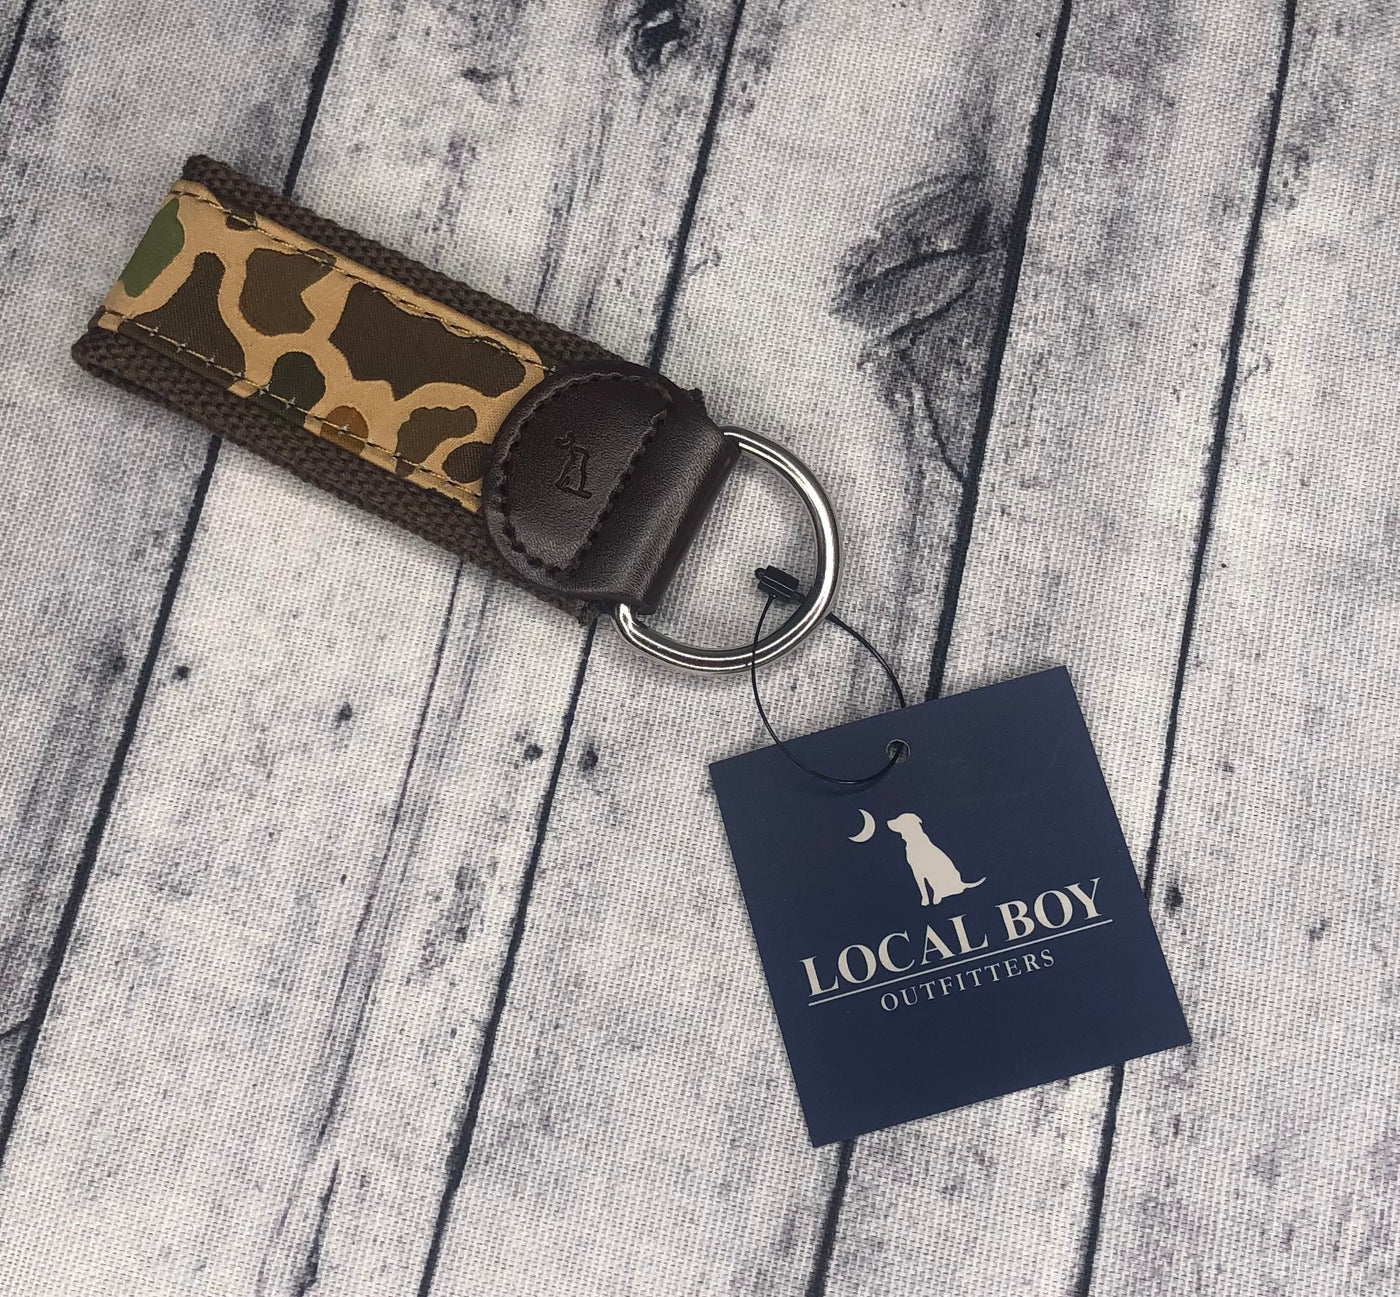 Local Boy Outfitters Key Chains